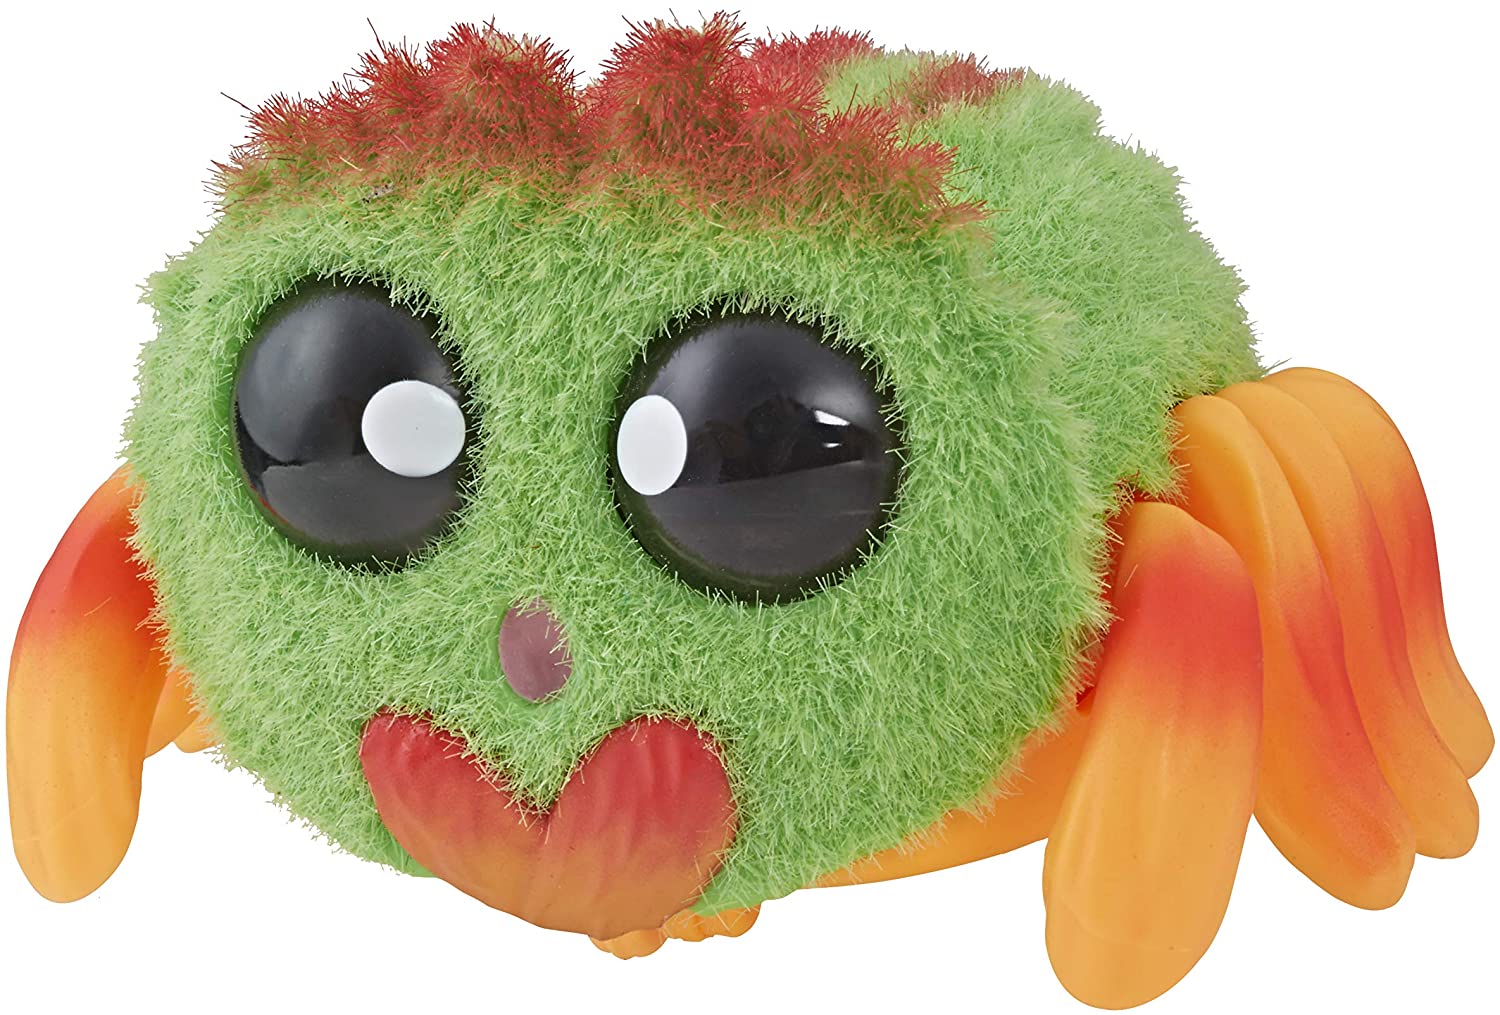 Hasbro Yellies! Cute, Interactive Spider-Responds To Sounds And Voice